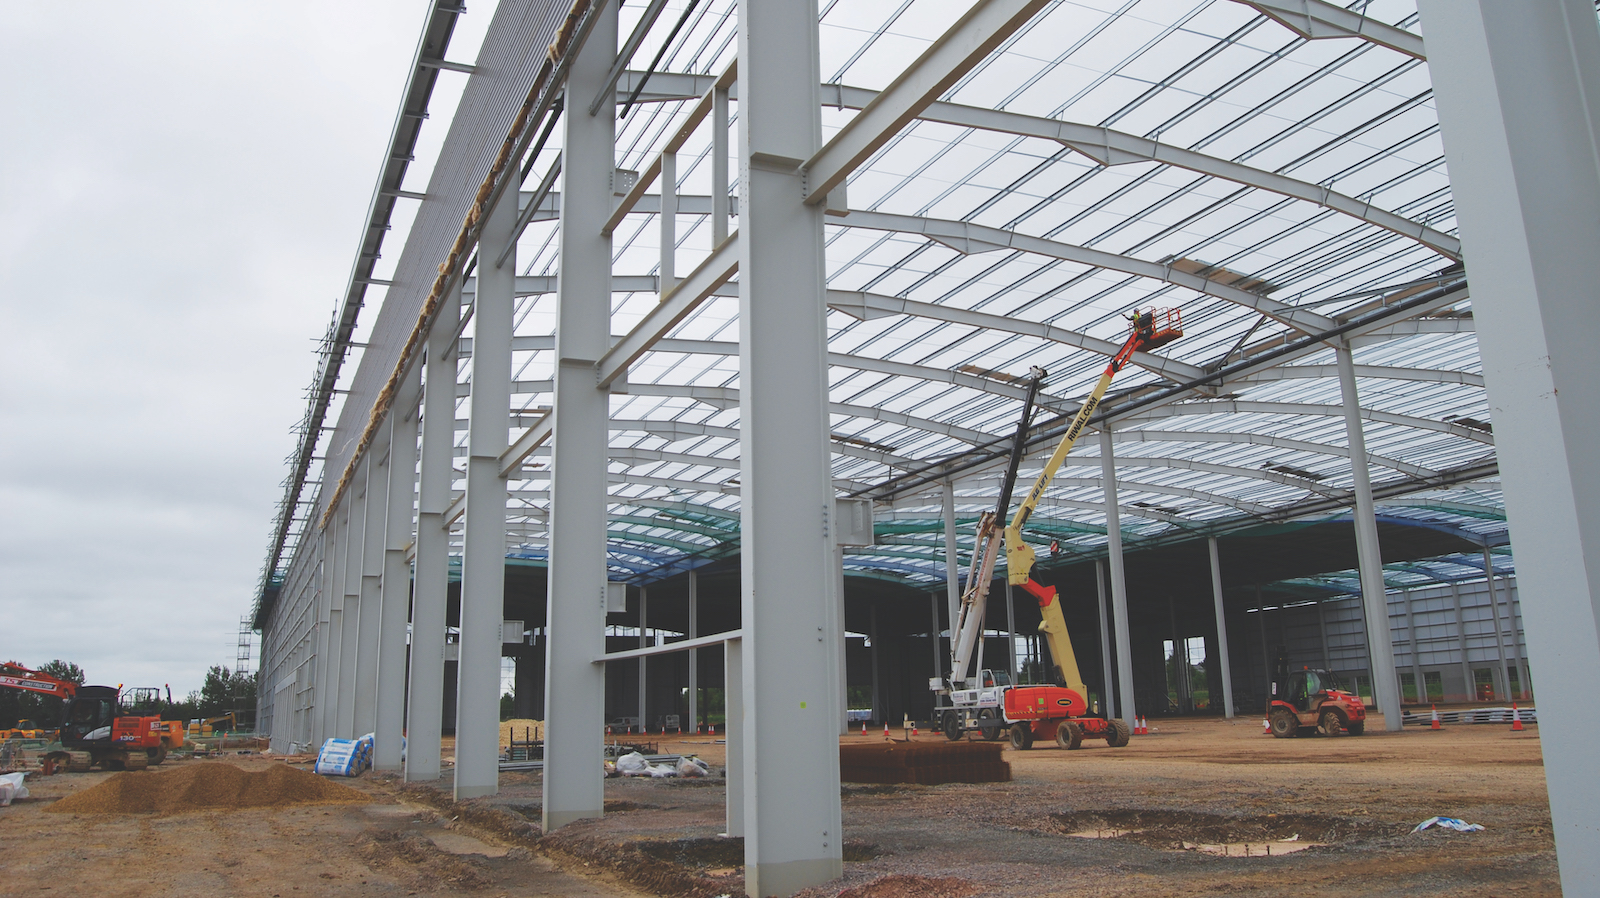 A major distribution centre for retailer Co-op in Biggleswade, Bedfordshire, features a steel portal structural design with spans of 36m and a maximum height of 15m. Caunton Engineering, working with main contractor Winvic, erected 2.5 tonnes of steel for the 61,409 sq m facility, while separate recycling and maintenance buildings have 28m-wide and 26m-wide spans respectively. Photo supplied by New Steel Construction